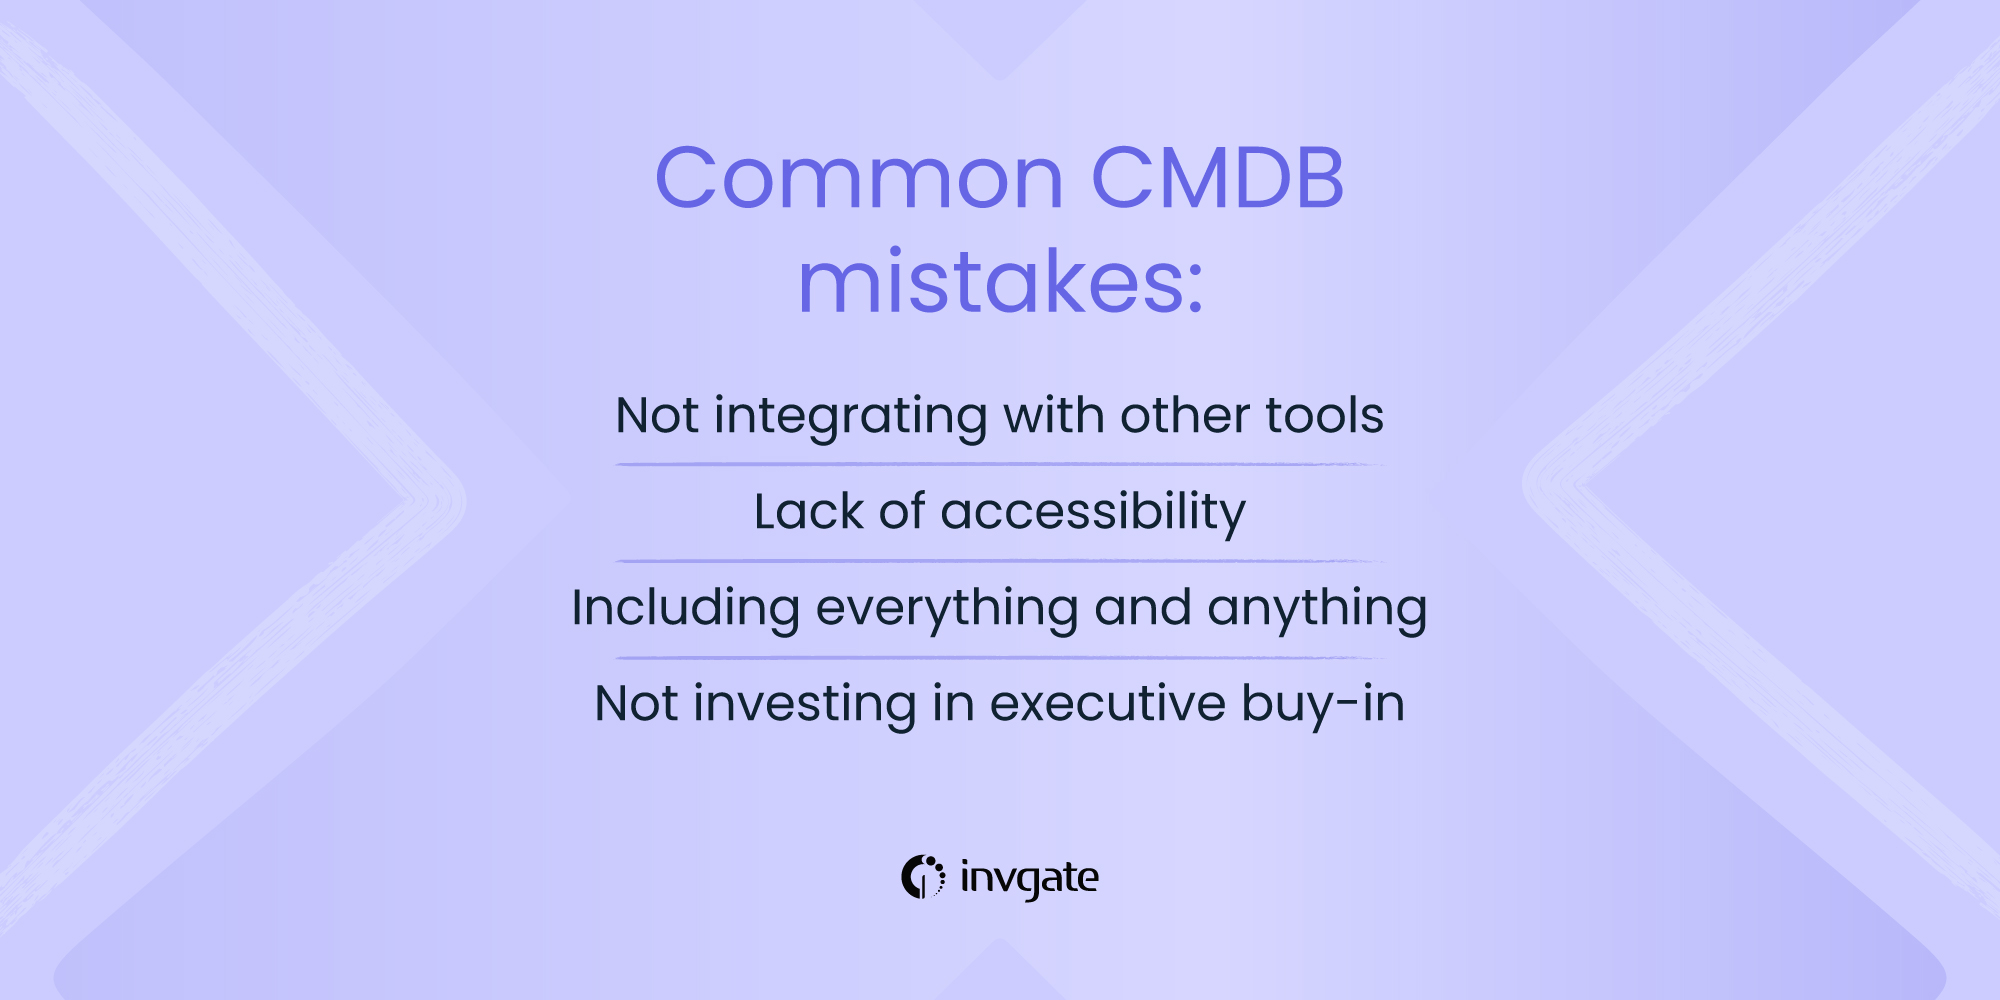 There are various CMDB mistakes that can b easily avoided